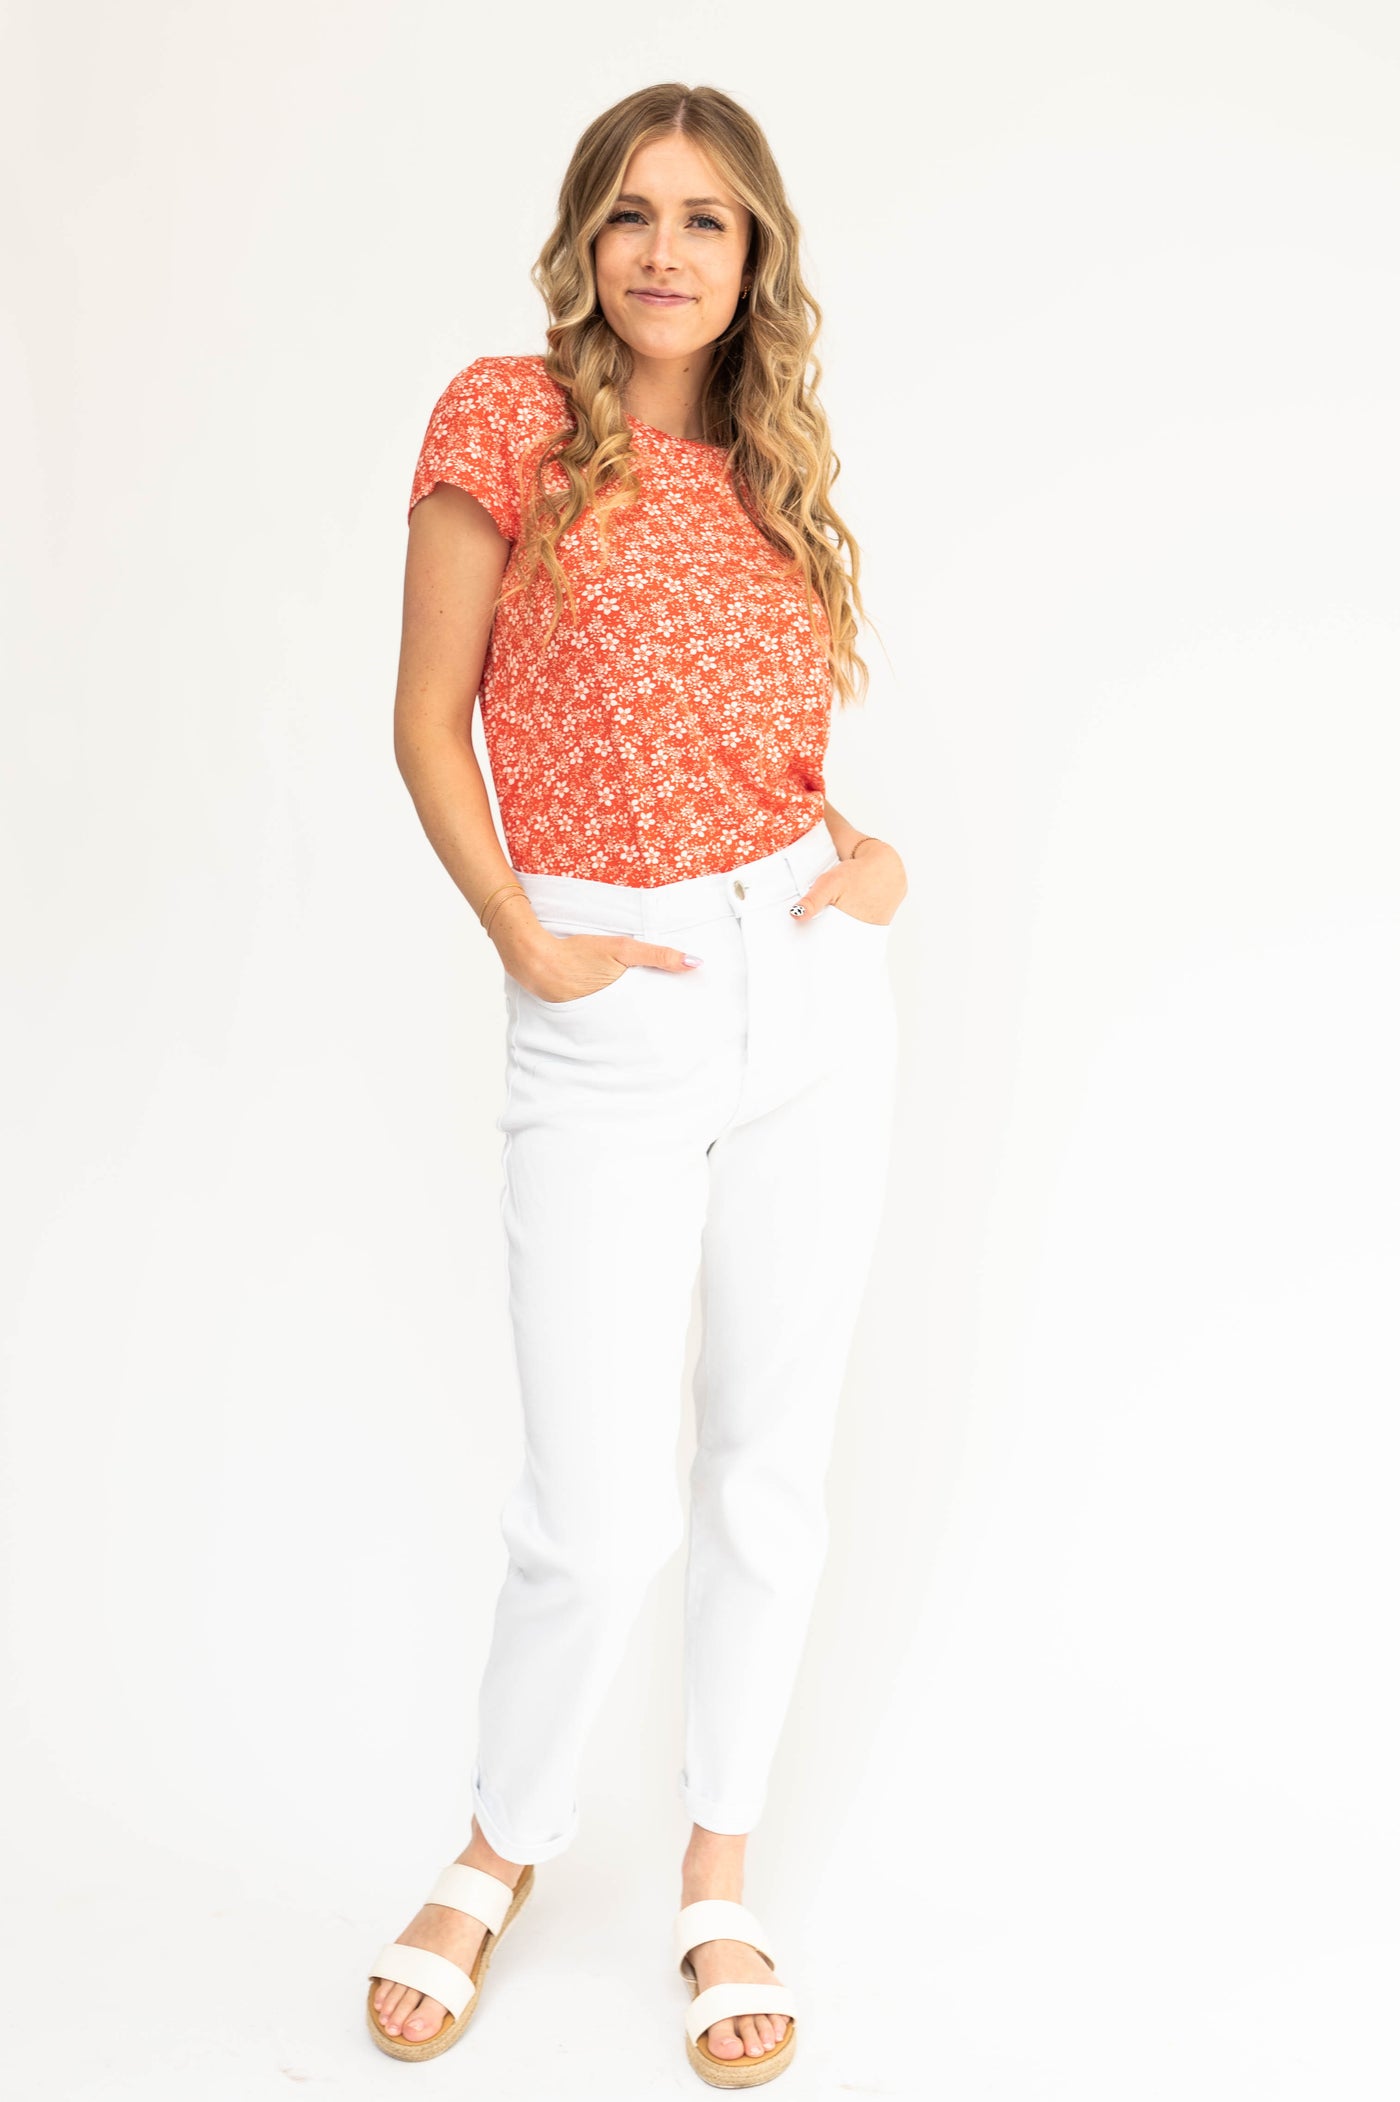 Short sleeve coral red top with white flowers